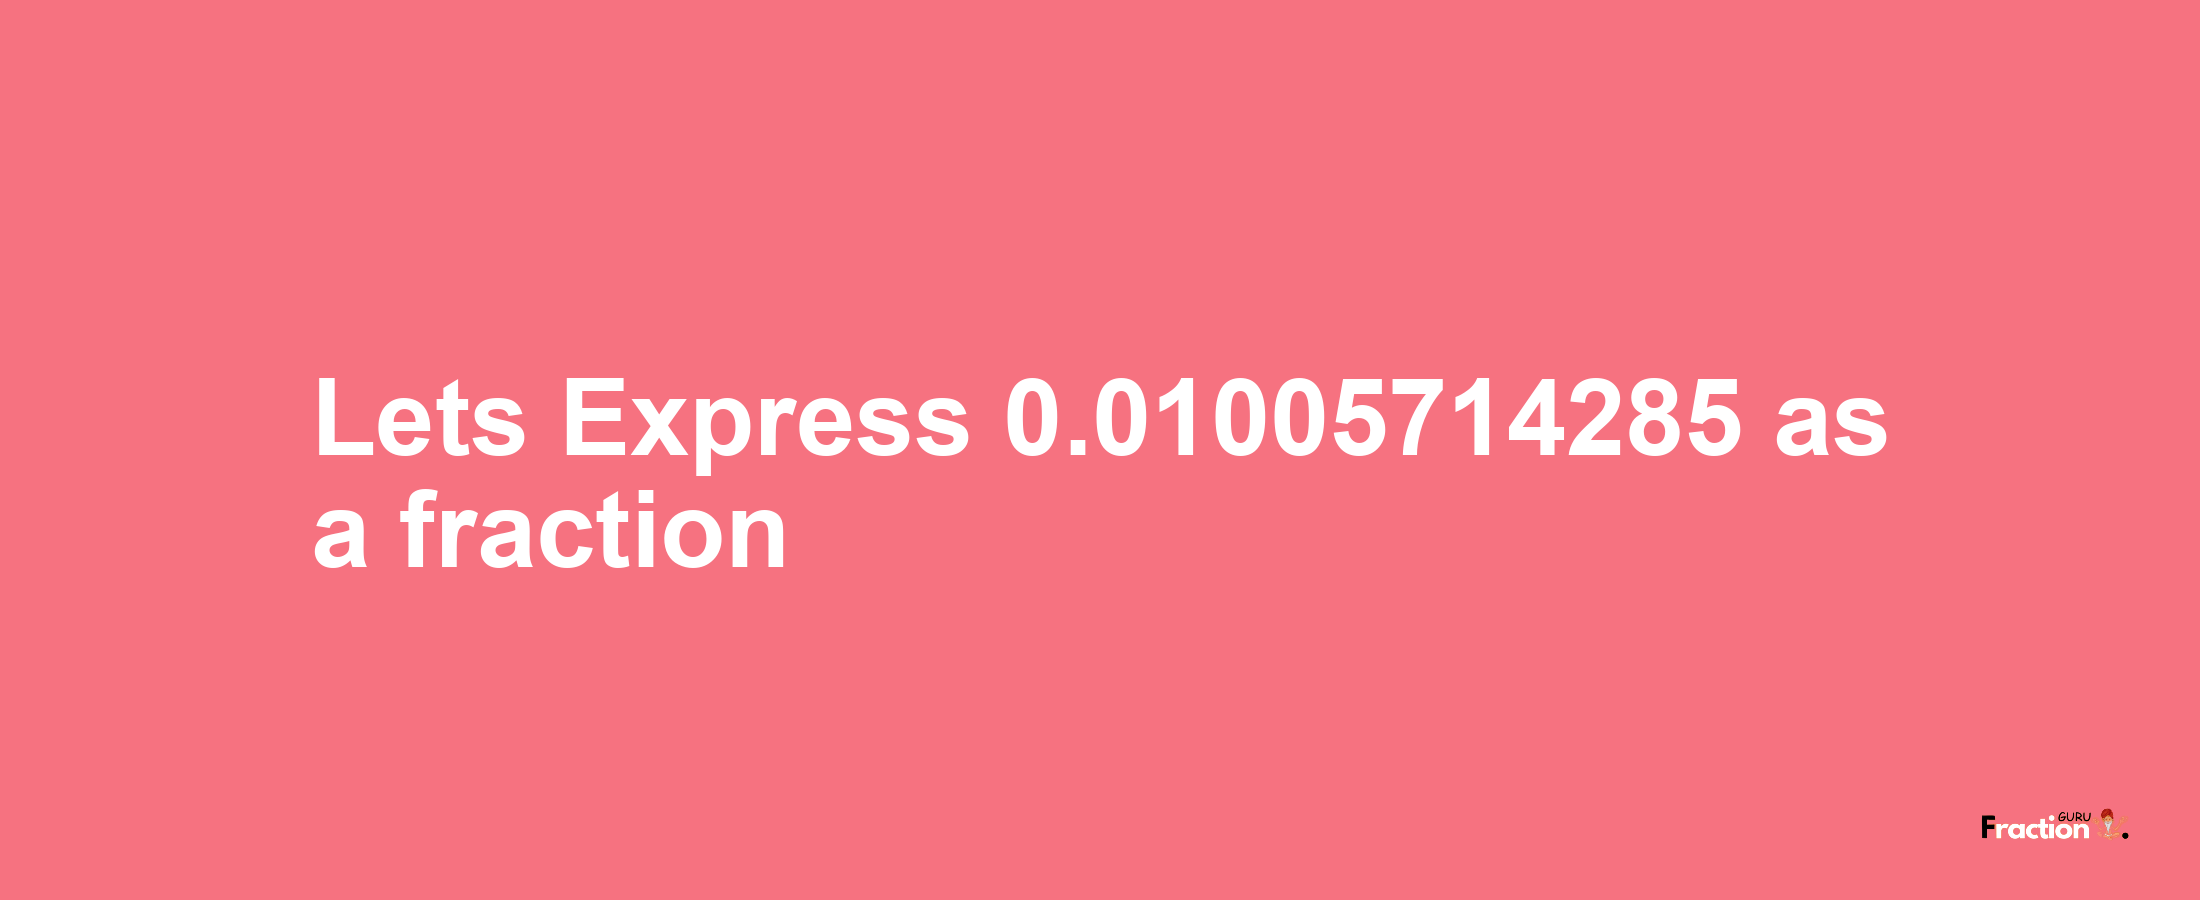 Lets Express 0.01005714285 as afraction